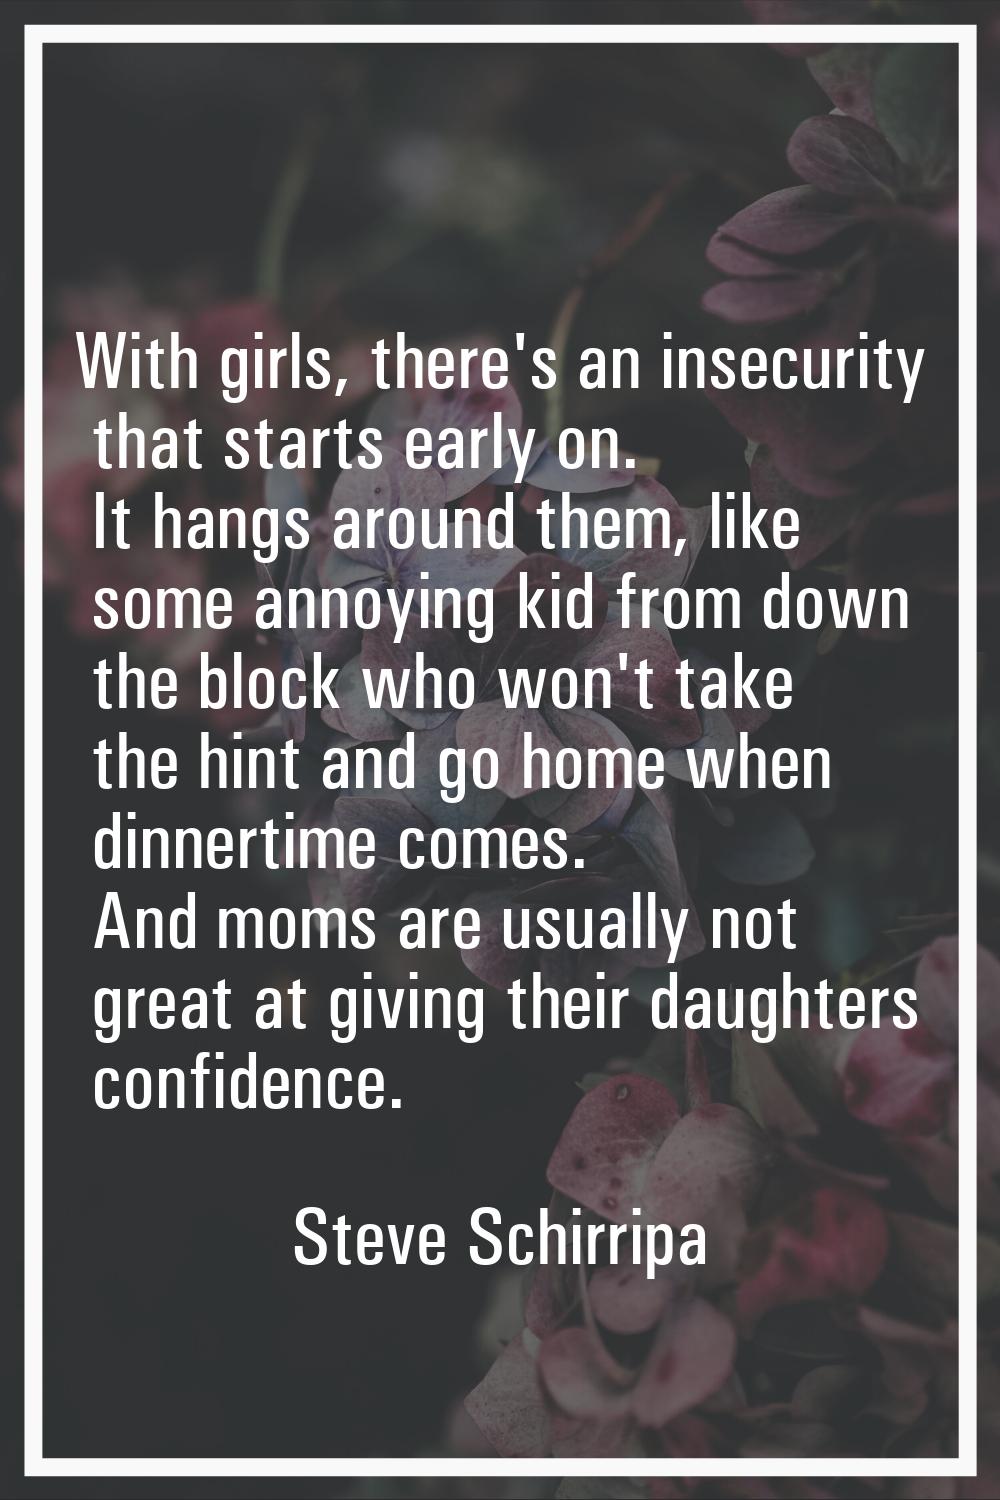 With girls, there's an insecurity that starts early on. It hangs around them, like some annoying ki